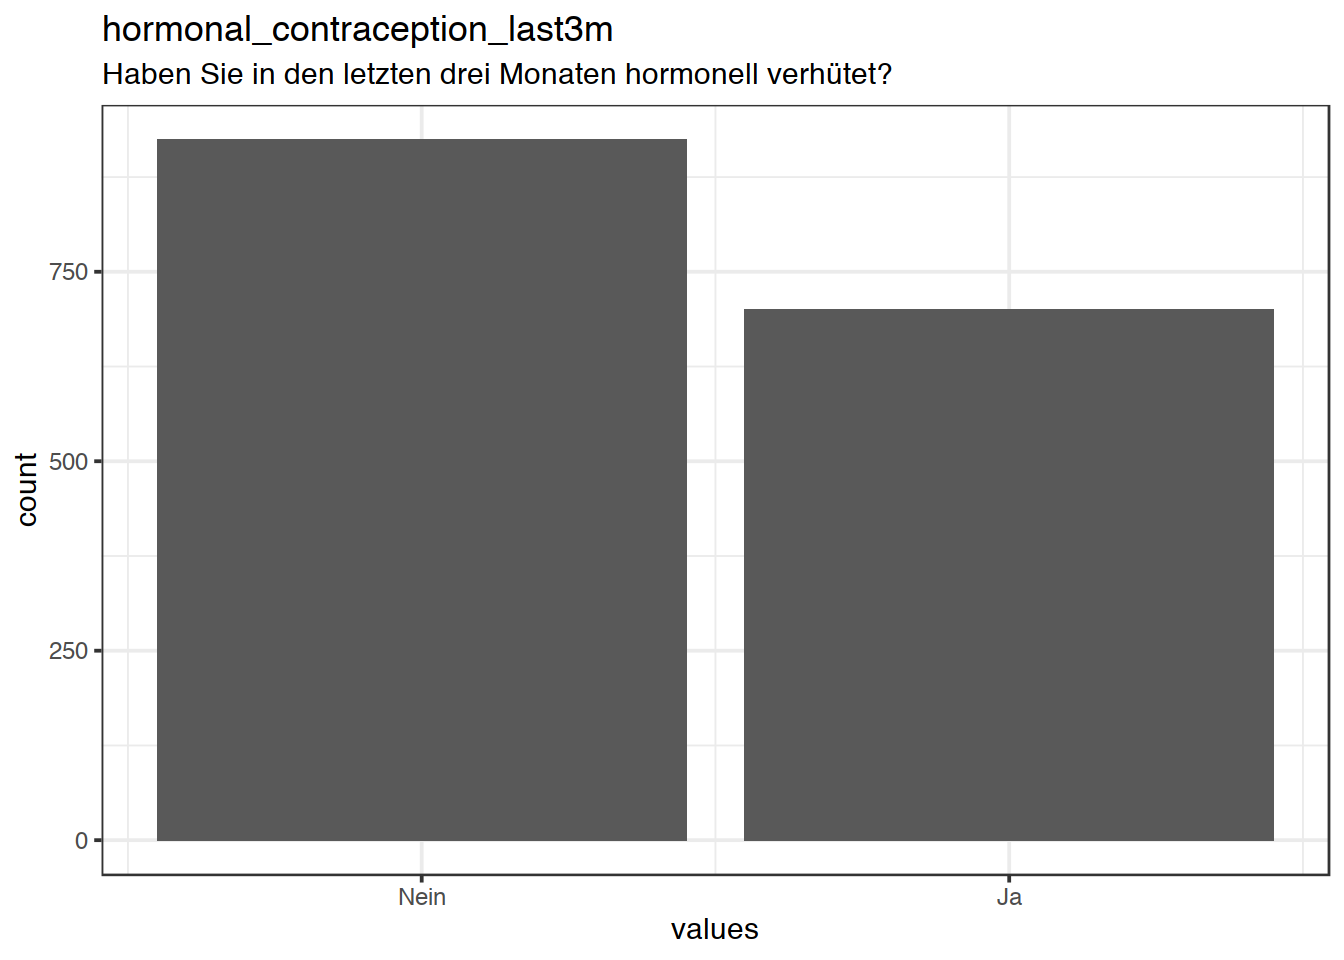 Distribution of values for hormonal_contraception_last3m